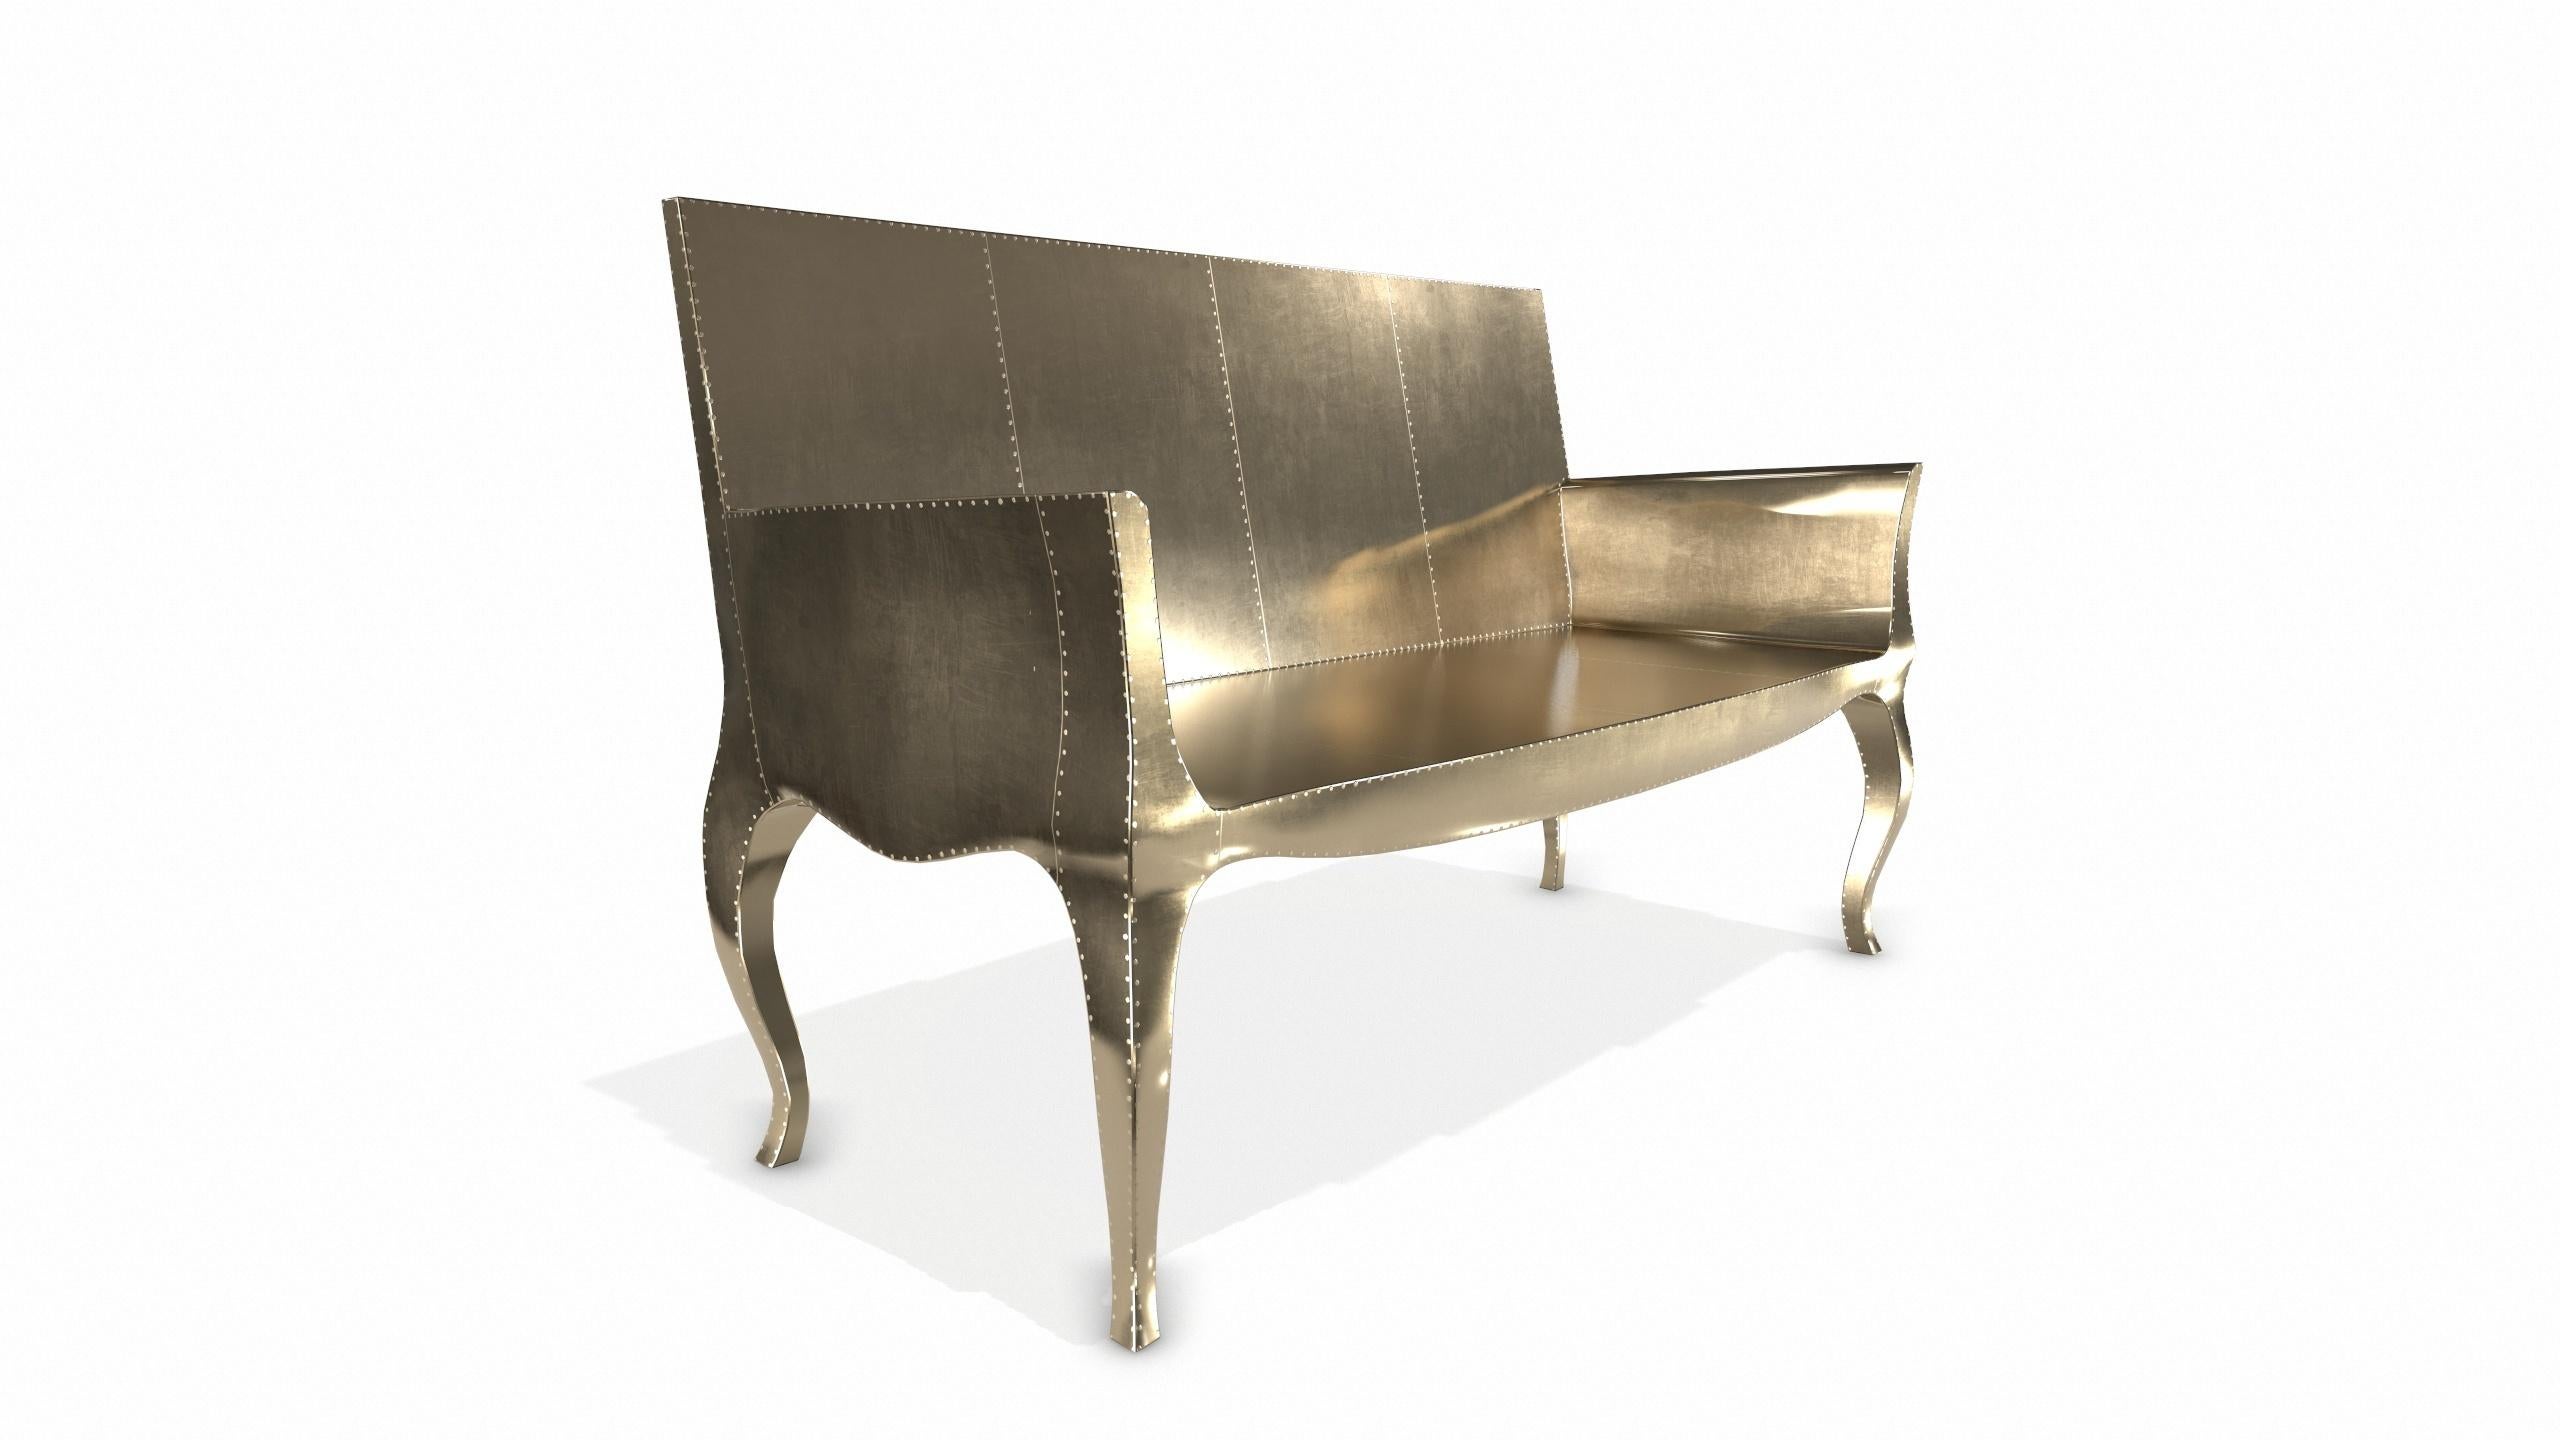 Louise Settee Art Deco Canapes in Smooth Brass by Paul Mathieu for S Odegard In New Condition For Sale In New York, NY